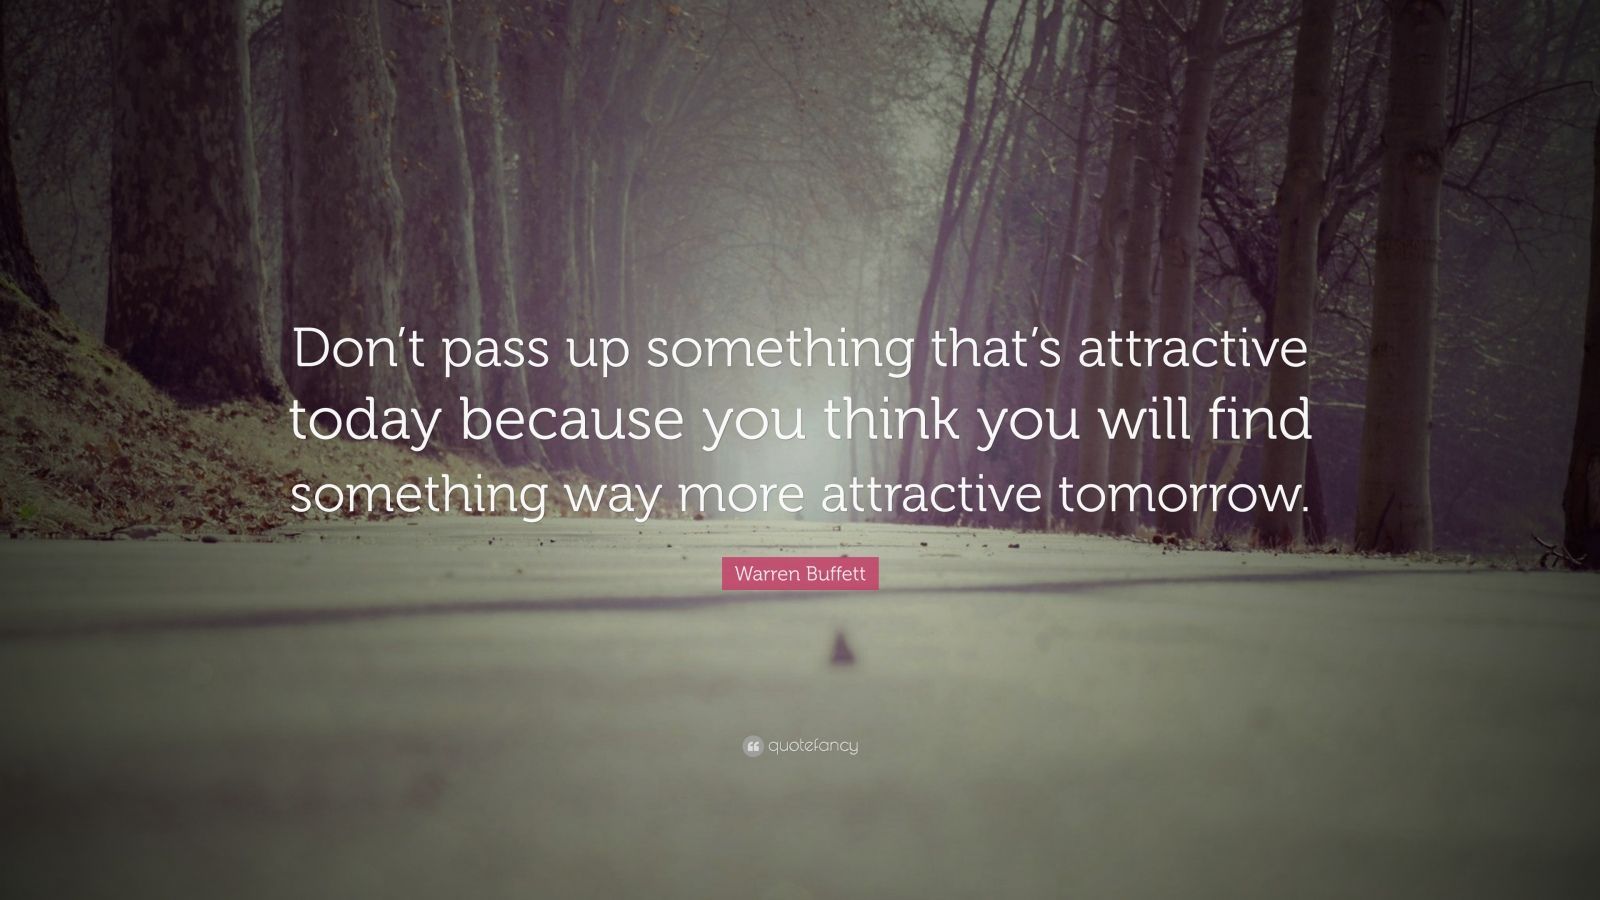 Warren Buffett Quote: “Don't pass up something that's attractive today because you think you will find something way more attractive tomorrow.” (12 wallpaper)